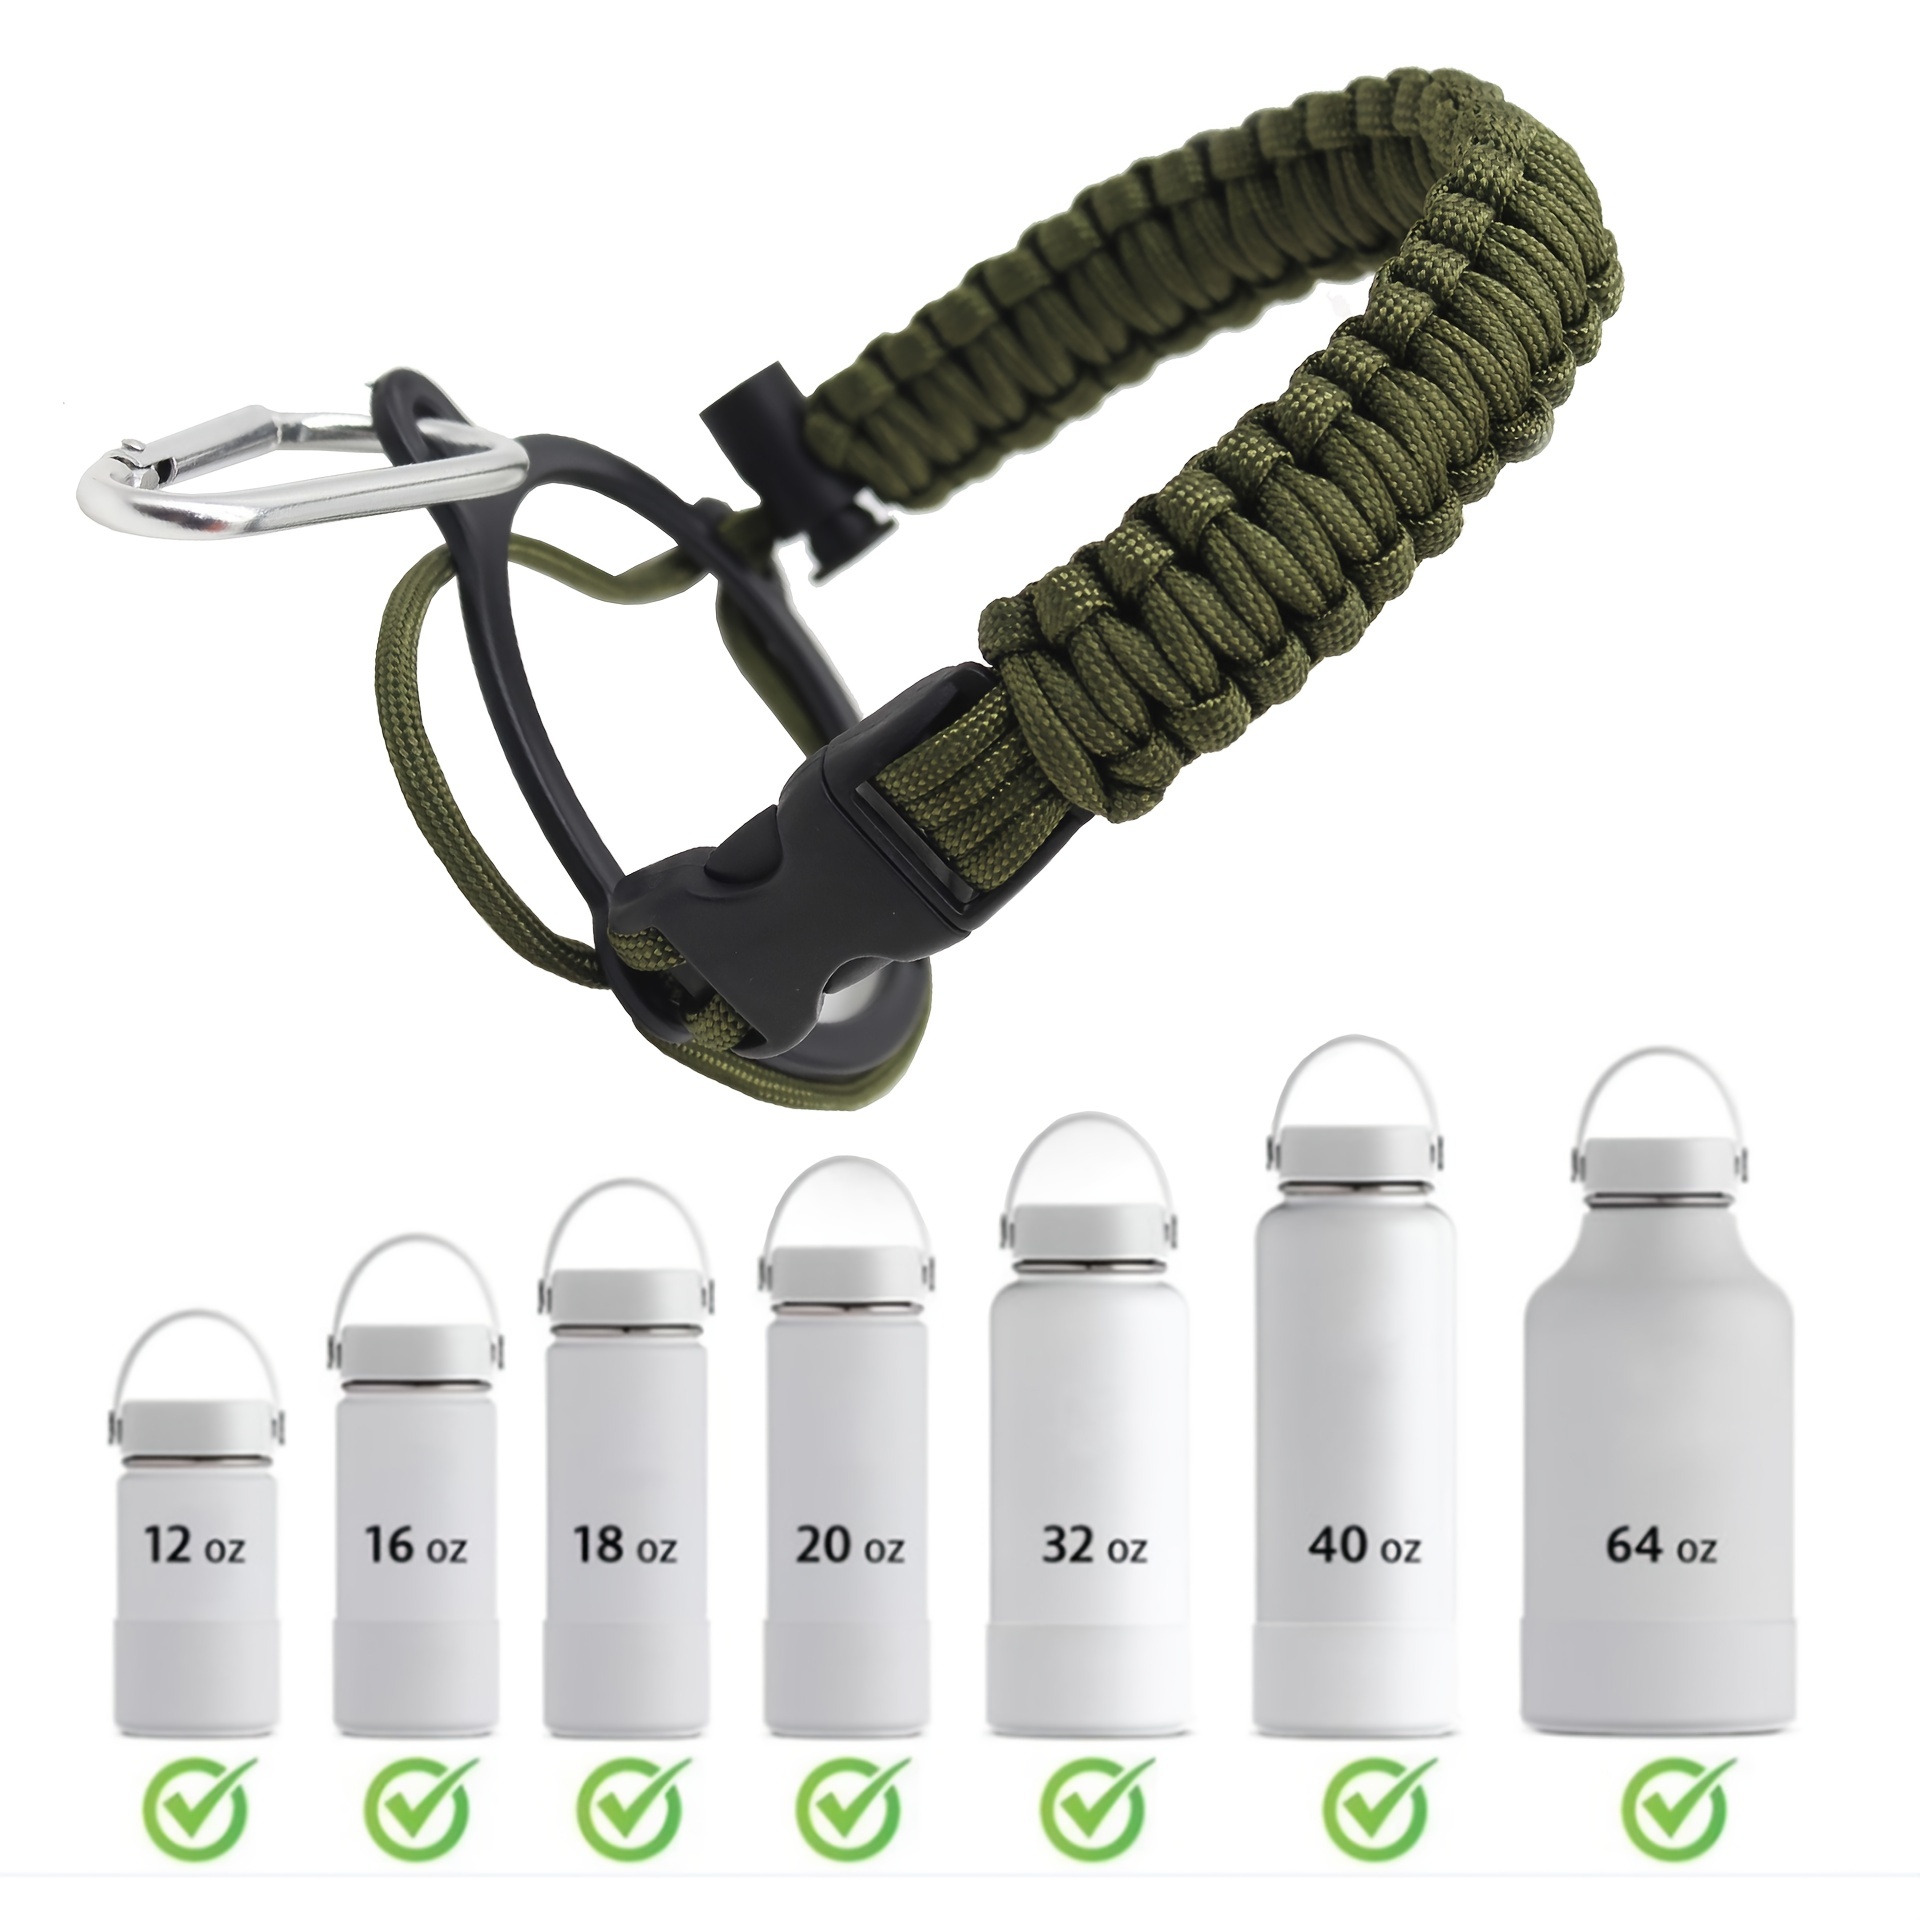 MONOBIN Paracord Handle - Fits Wide Mouth Bottles 12oz to 64oz